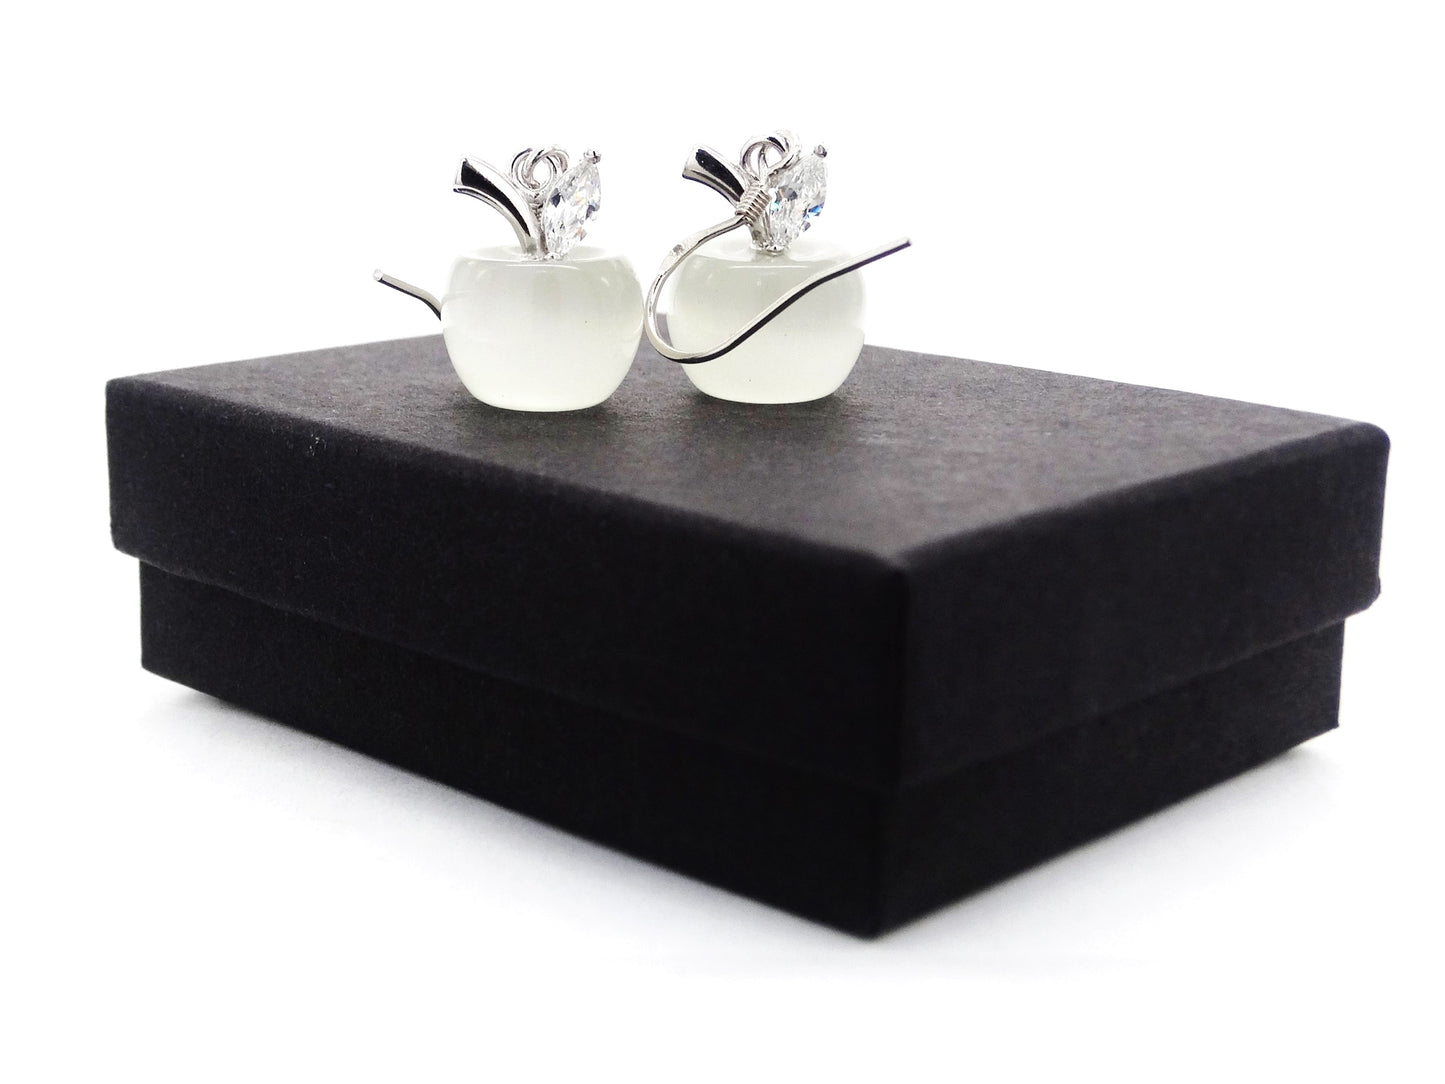 White moonstone apple necklace and earrings GIFT BOX